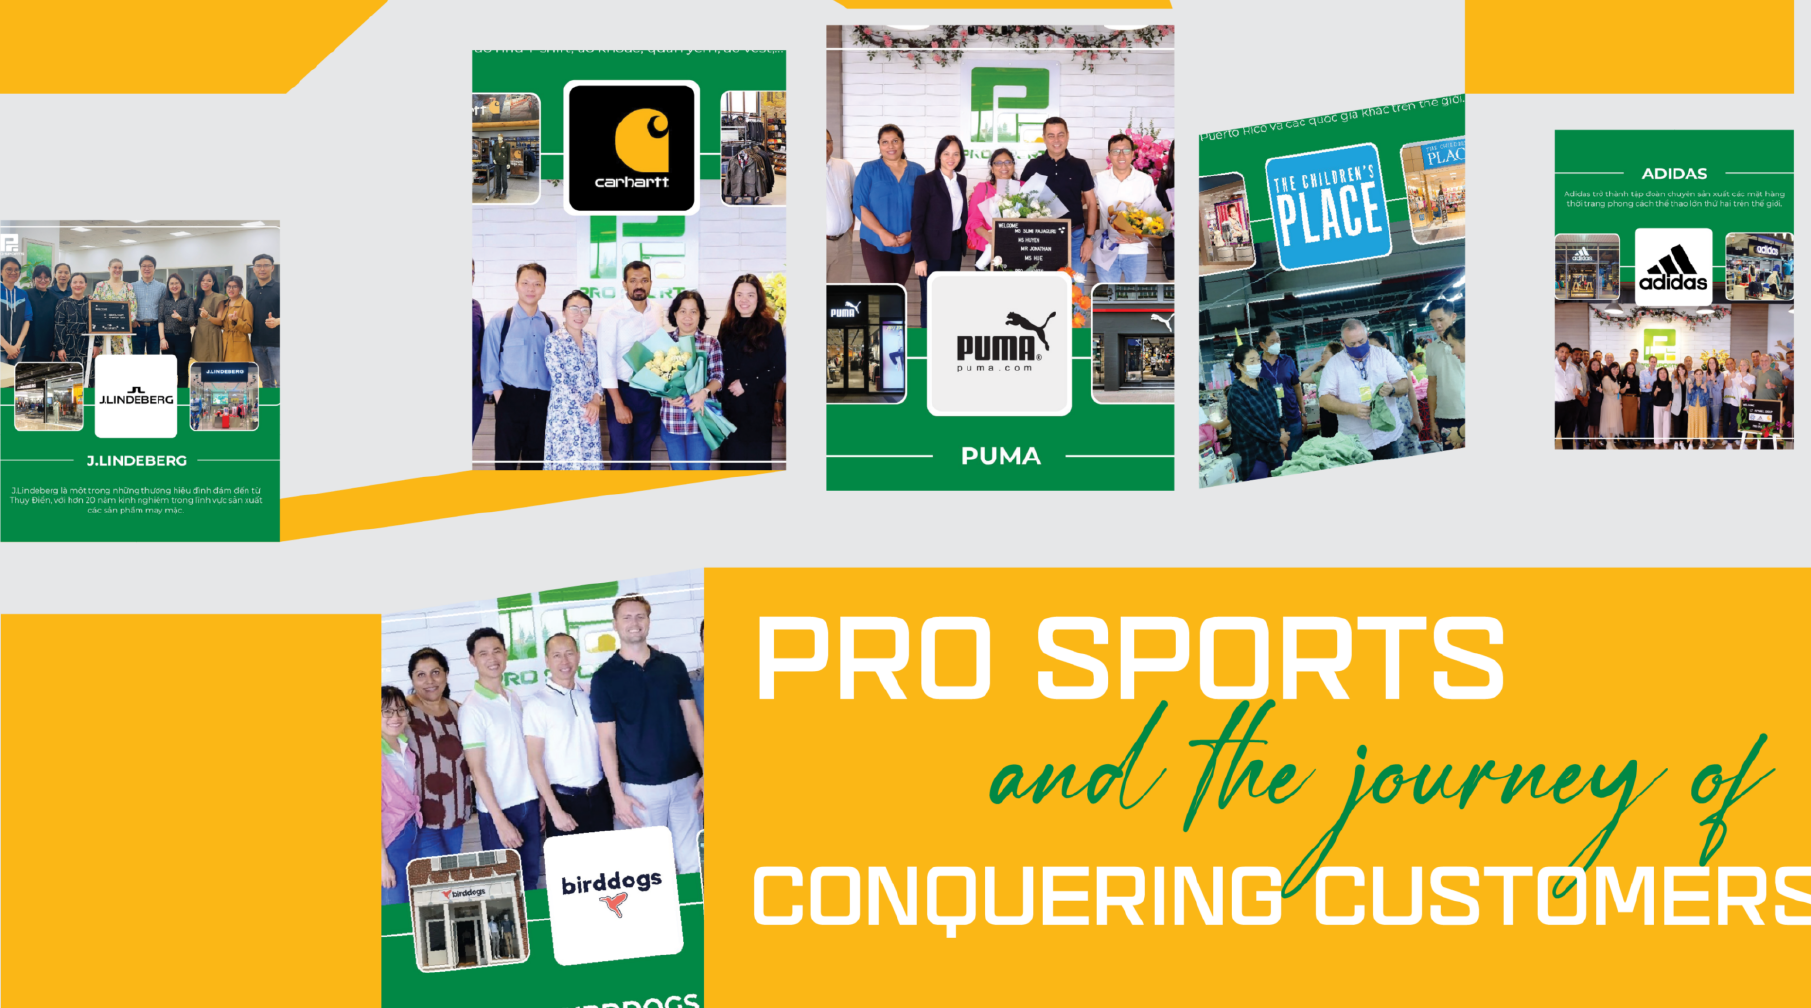 Pro Sports and the journey of conquering customers